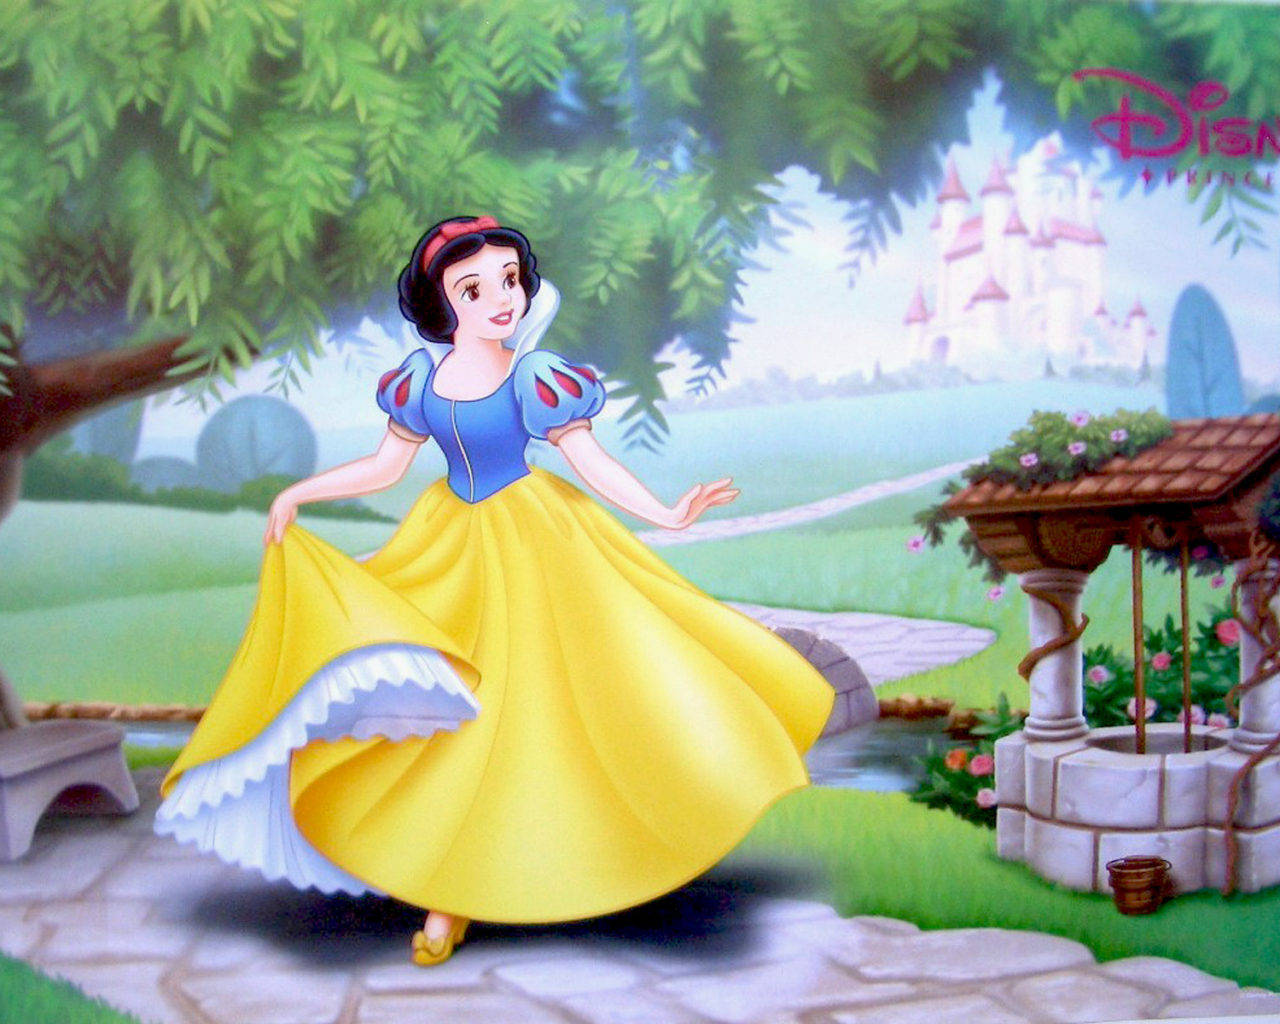 Snow White And The Seven Dwarfs With Well Background